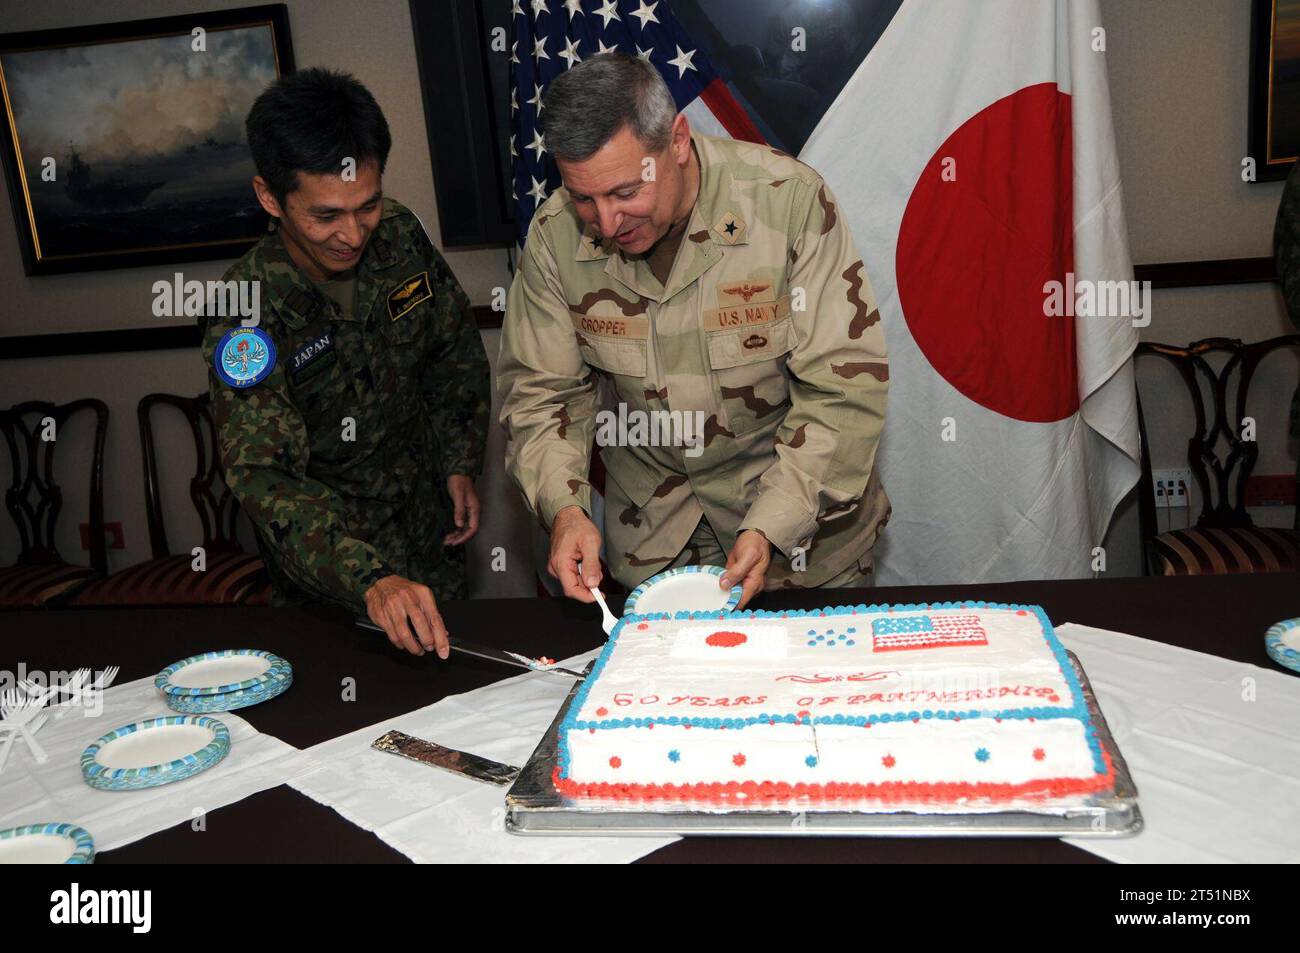 1001196832D-395  MANAMA, Bahrain (Jan. 19, 2010) Rear Adm. T. C. Cropper, deputy commander of U.S. Central Command and Japan Maritime Self-Defense Force Cmdr. Eiji Imanishi prepare to cut the cake at a ceremony marking the 50th anniversary of the Treaty of Mutual Cooperation and Security between the U.S. and Japan. Signed and ratified in 1960, the treaty serves as a foundation for the strong alliance and interoperability between the U.S. Navy and the Japan Maritime Self-Defense Force. Navy Stock Photo